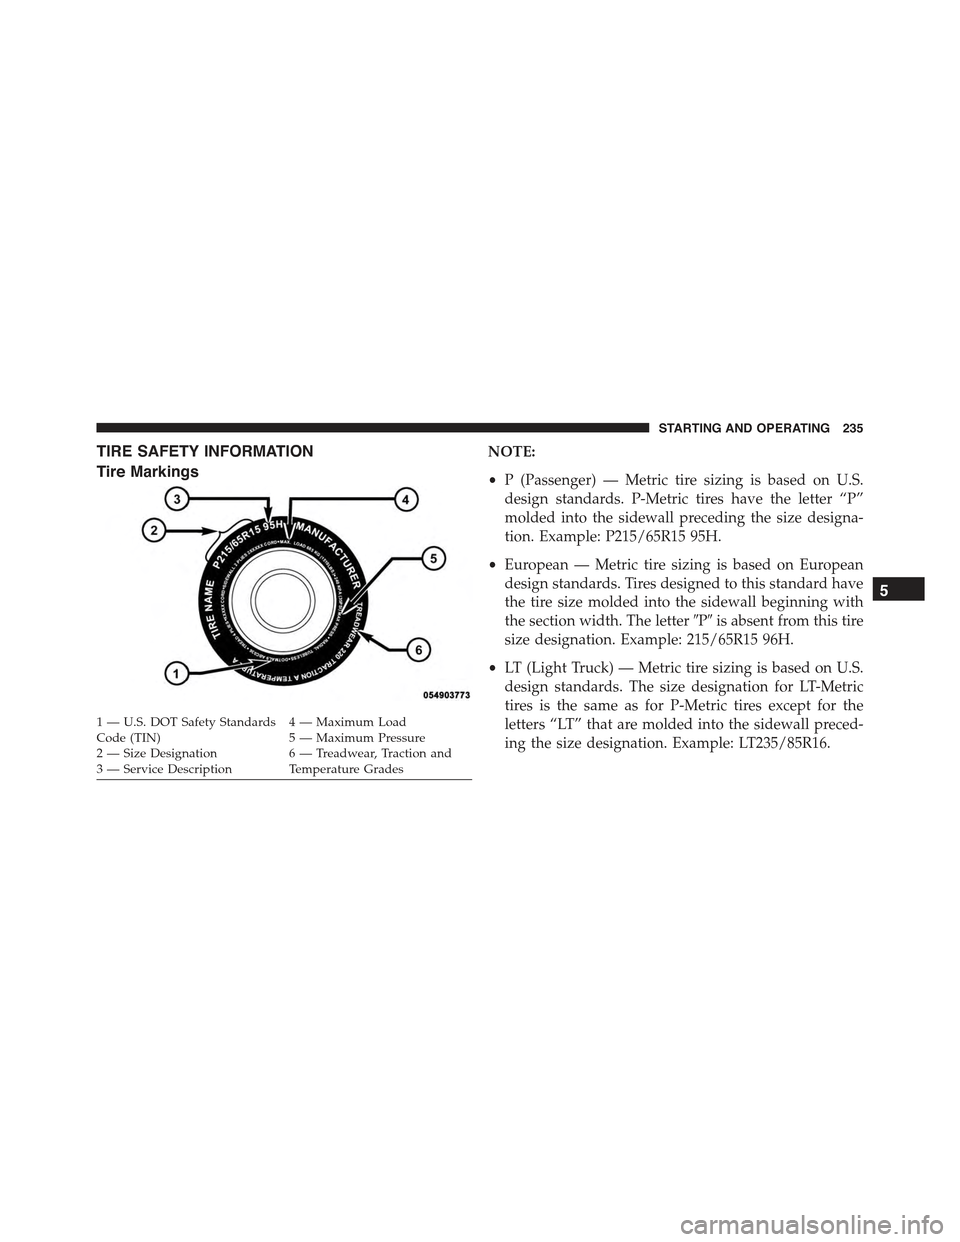 FIAT 500E 2015 2.G Owners Manual TIRE SAFETY INFORMATION
Tire Markings
NOTE:
•P (Passenger) — Metric tire sizing is based on U.S.
design standards. P-Metric tires have the letter “P”
molded into the sidewall preceding the siz